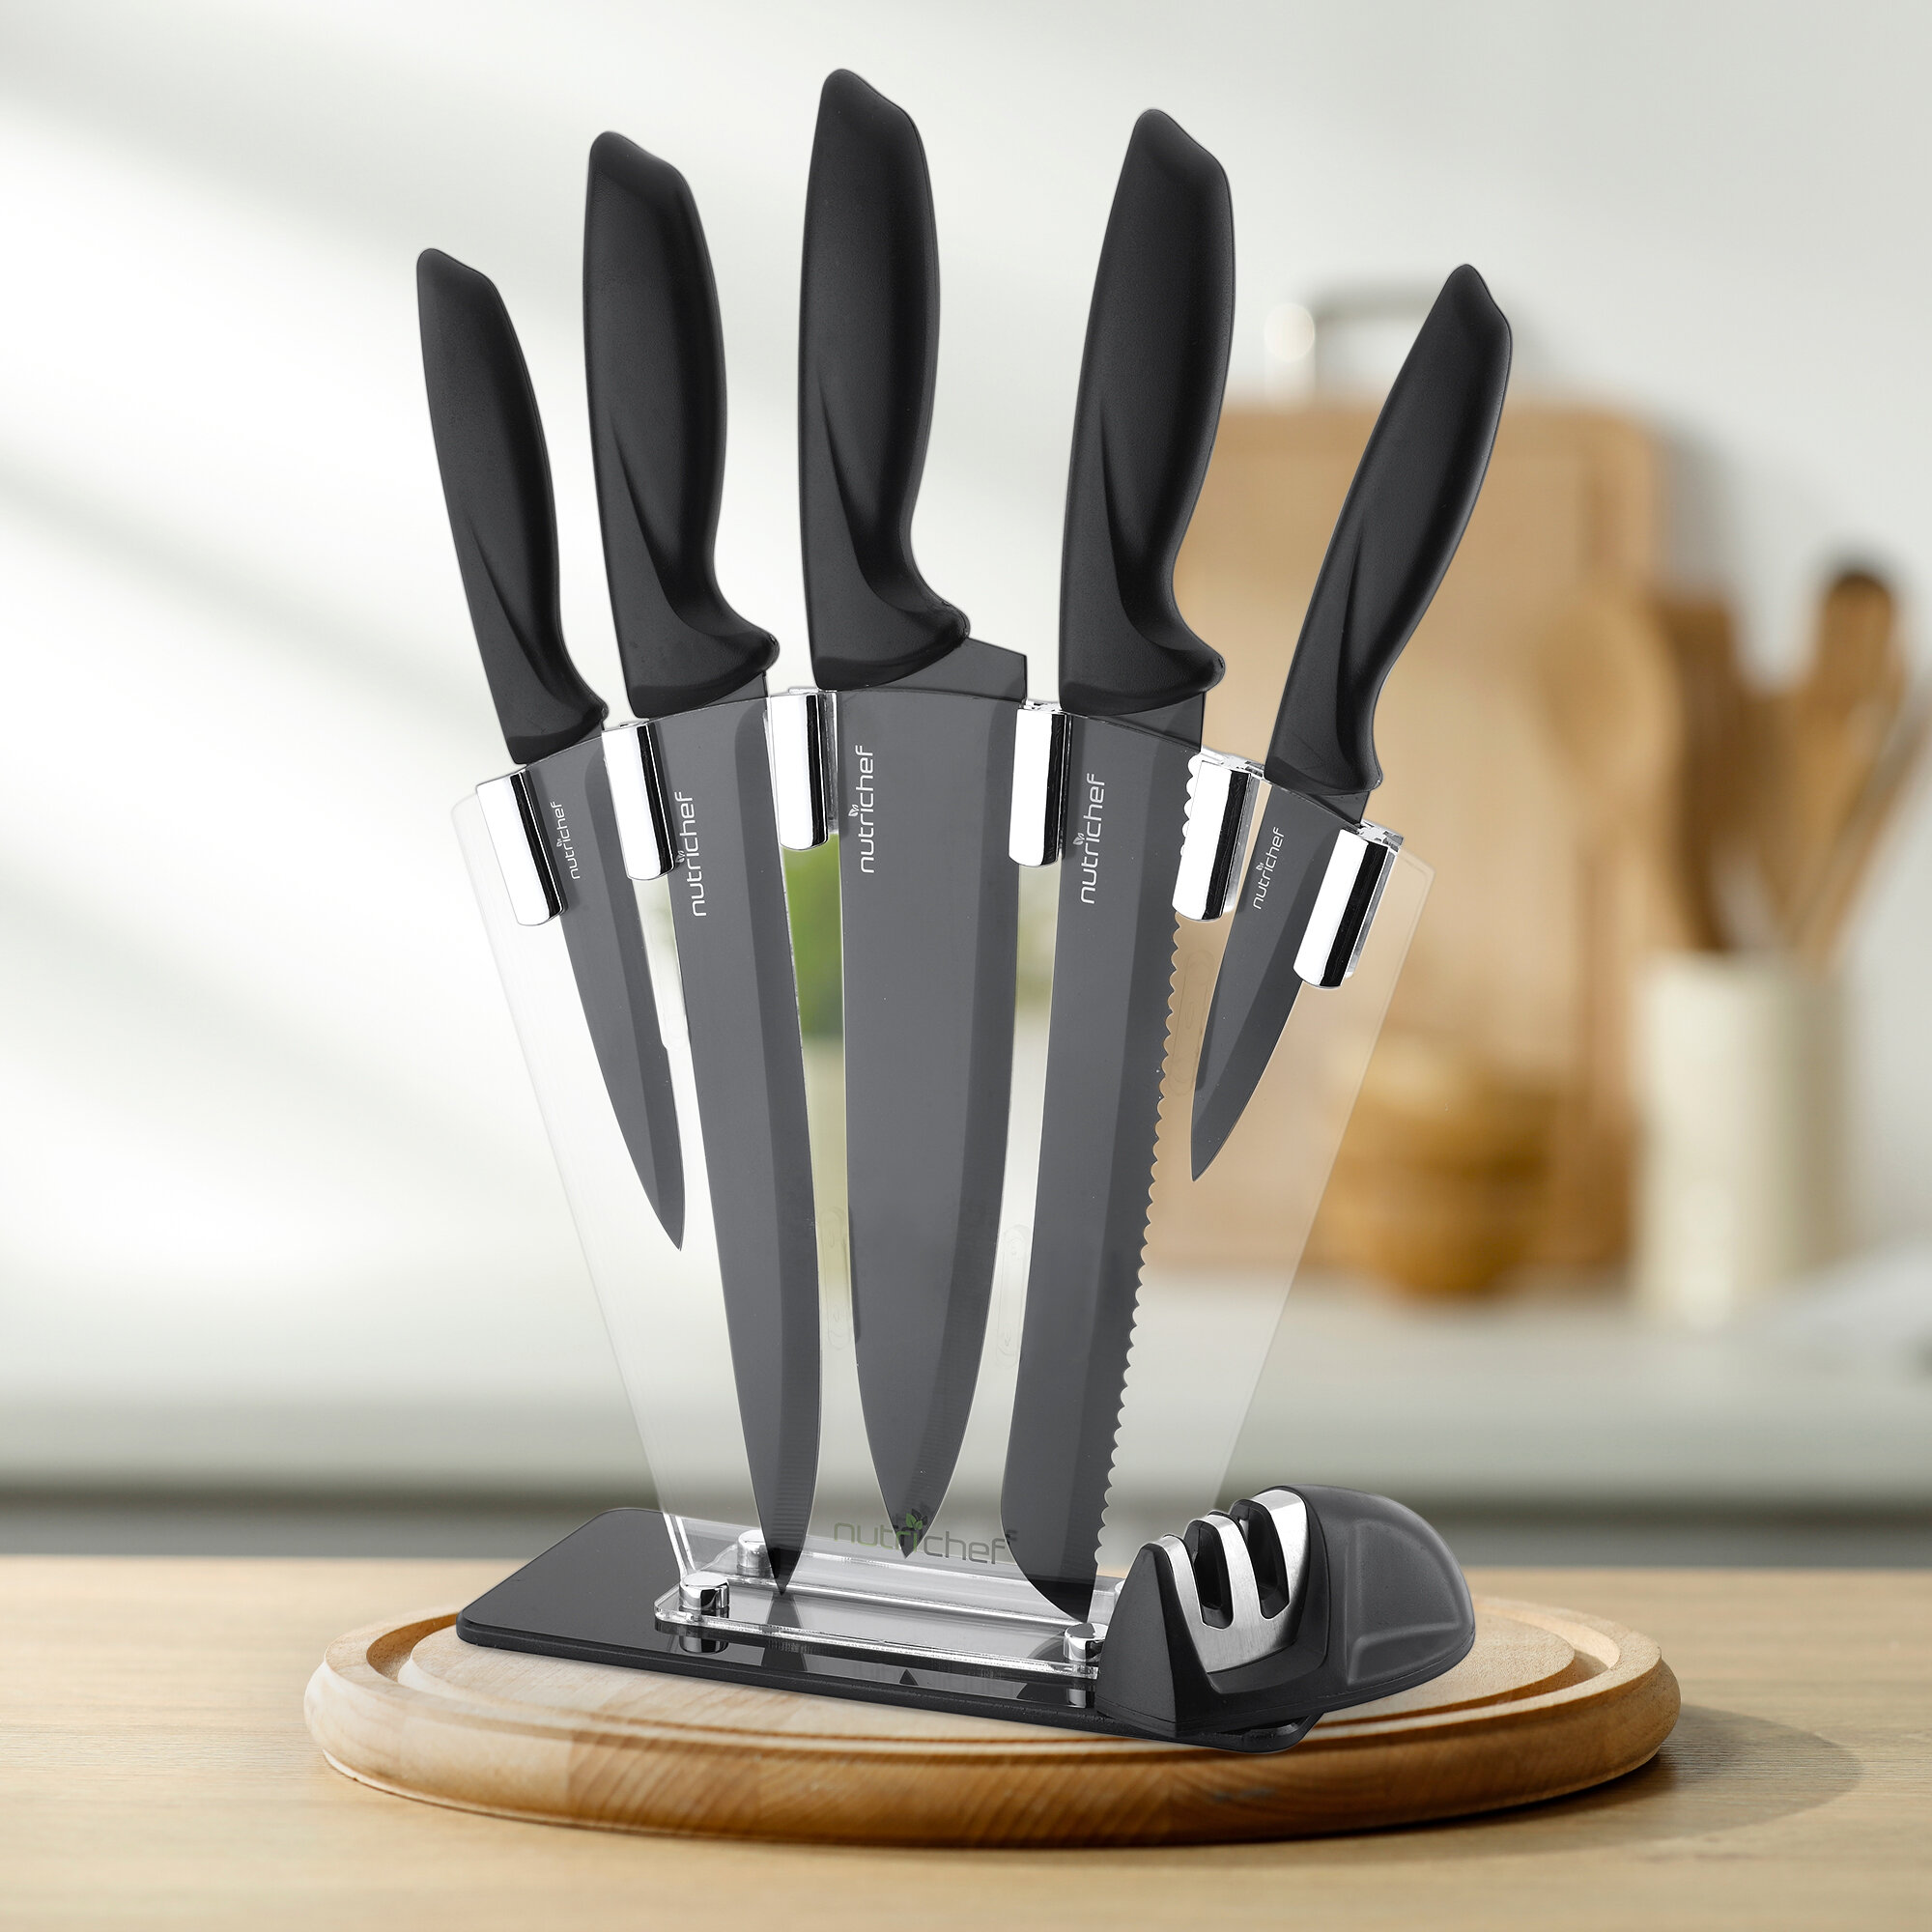 MasterChef Knife Block Set of Kitchen Knives, 5pc Stainless Steel Cooking  Knife Collection incl. Paring, Carving, Bread, Santoku & Chef Knife with